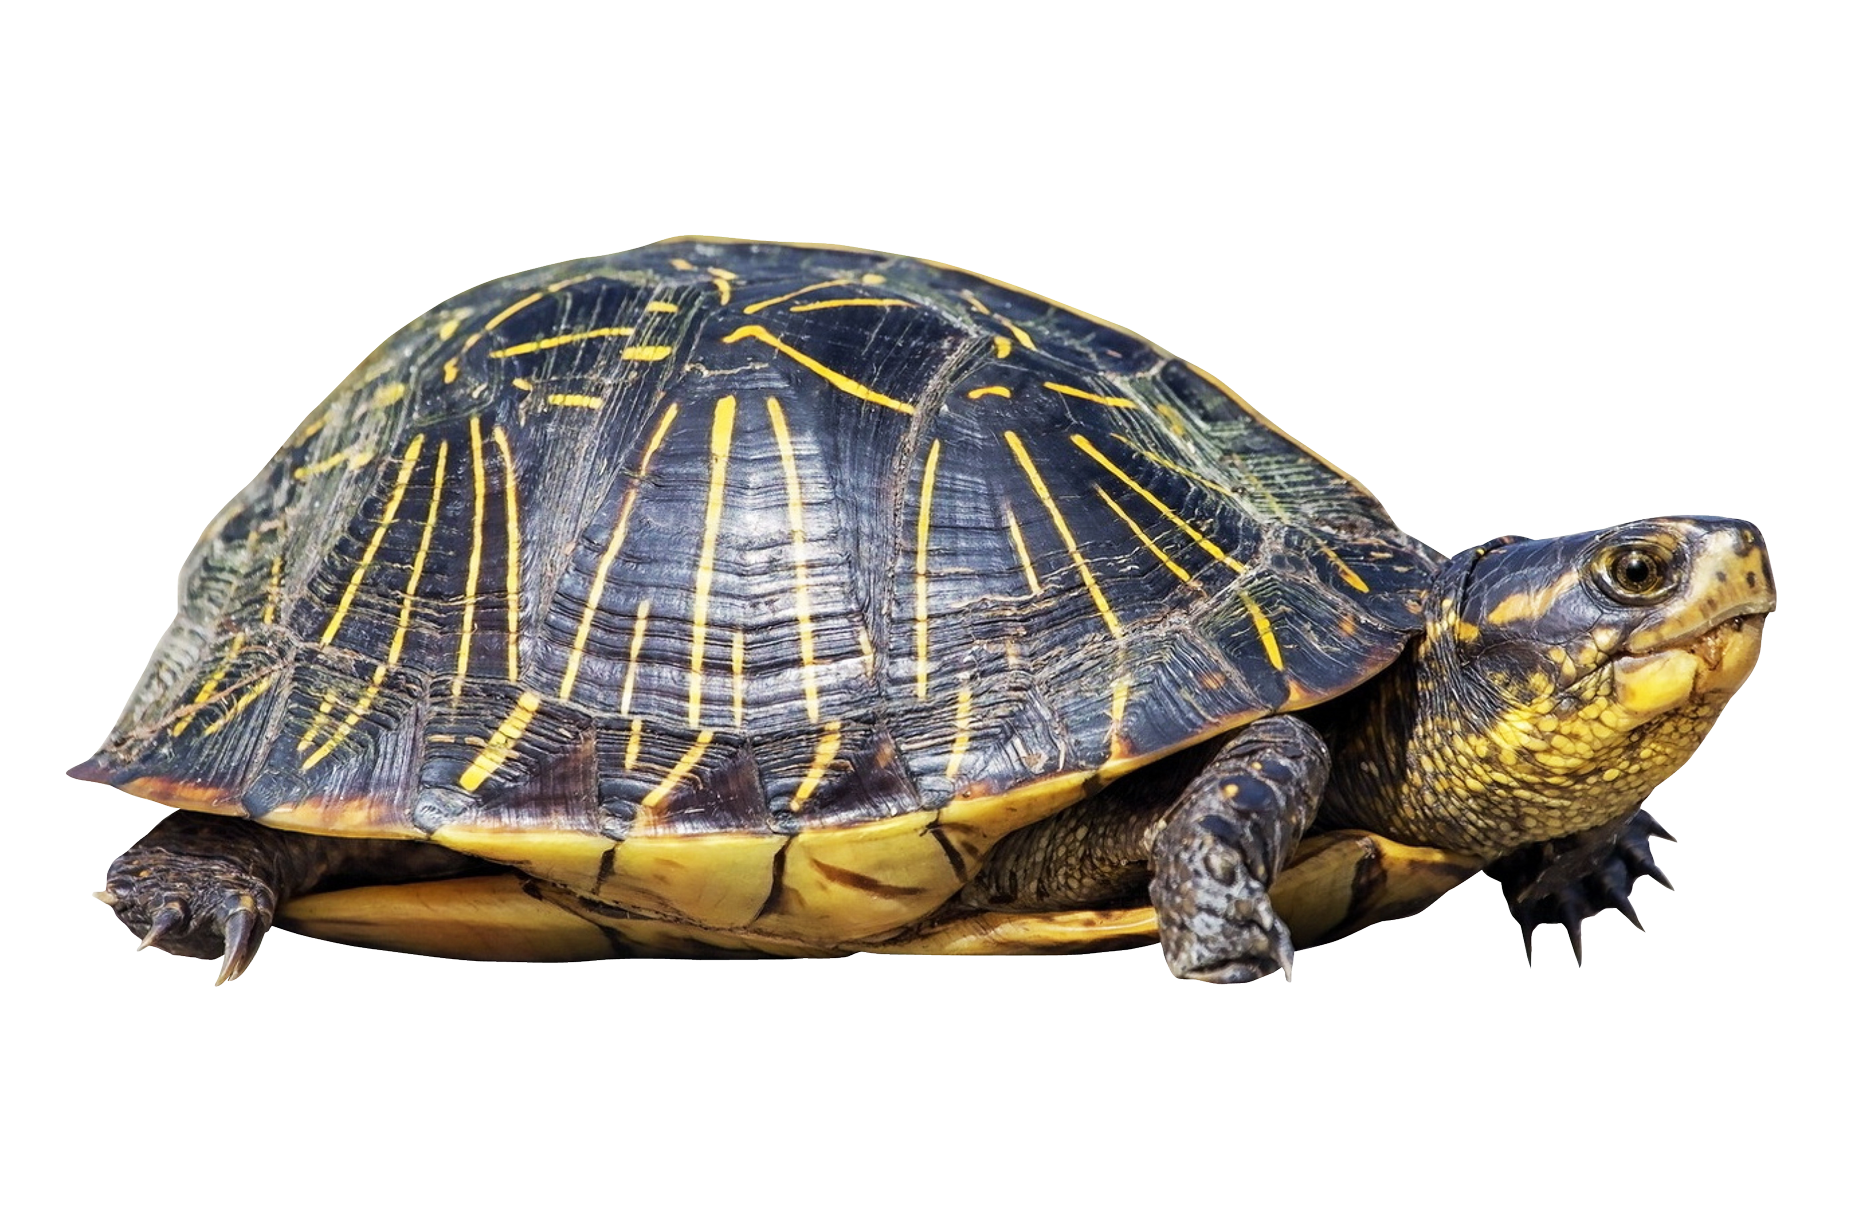 Turtle Png Transparent Image - Turtle Shell, Transparent background PNG HD thumbnail